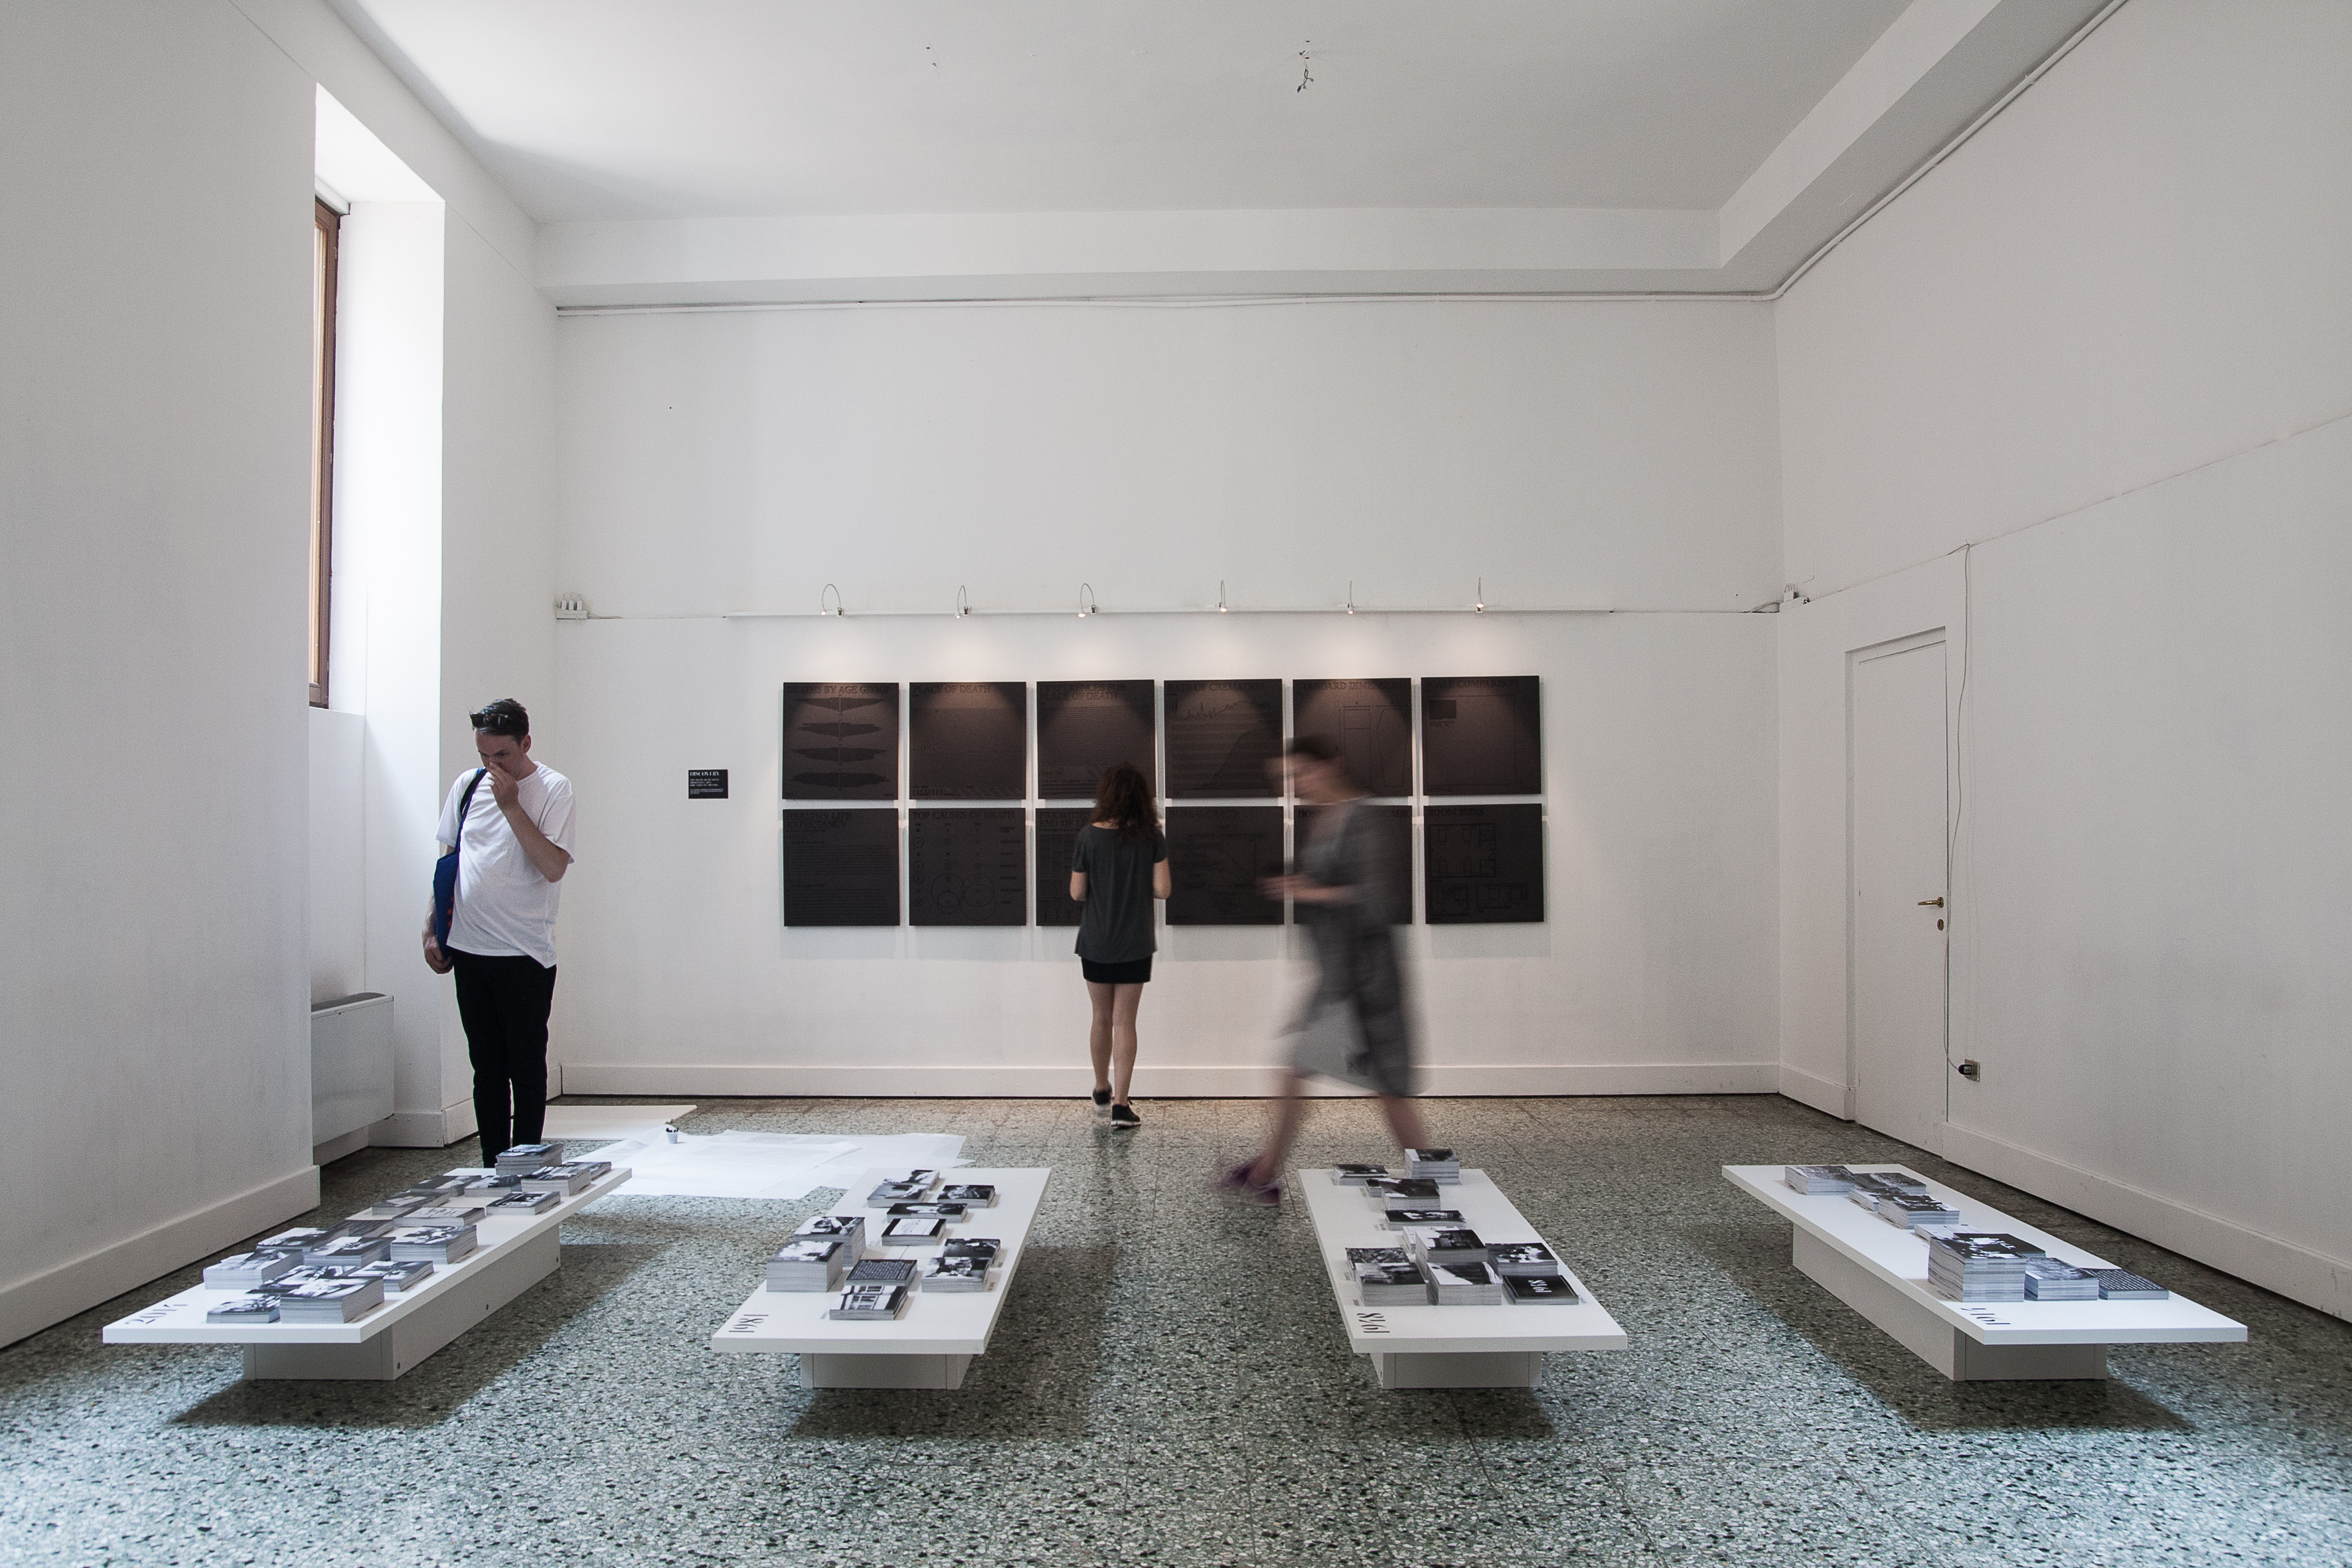 The final room in the Death in Venice exhibition. Panels on the back wall are infographics on death-related statistics, printed as reliefs so that visitors could make souvenir newsprint-and graphite-rubbings. Tables in the foreground hold postcards with information about death-related spaces, covering 1914, 1948, 1981 and 2014. Photo: A. Molenda